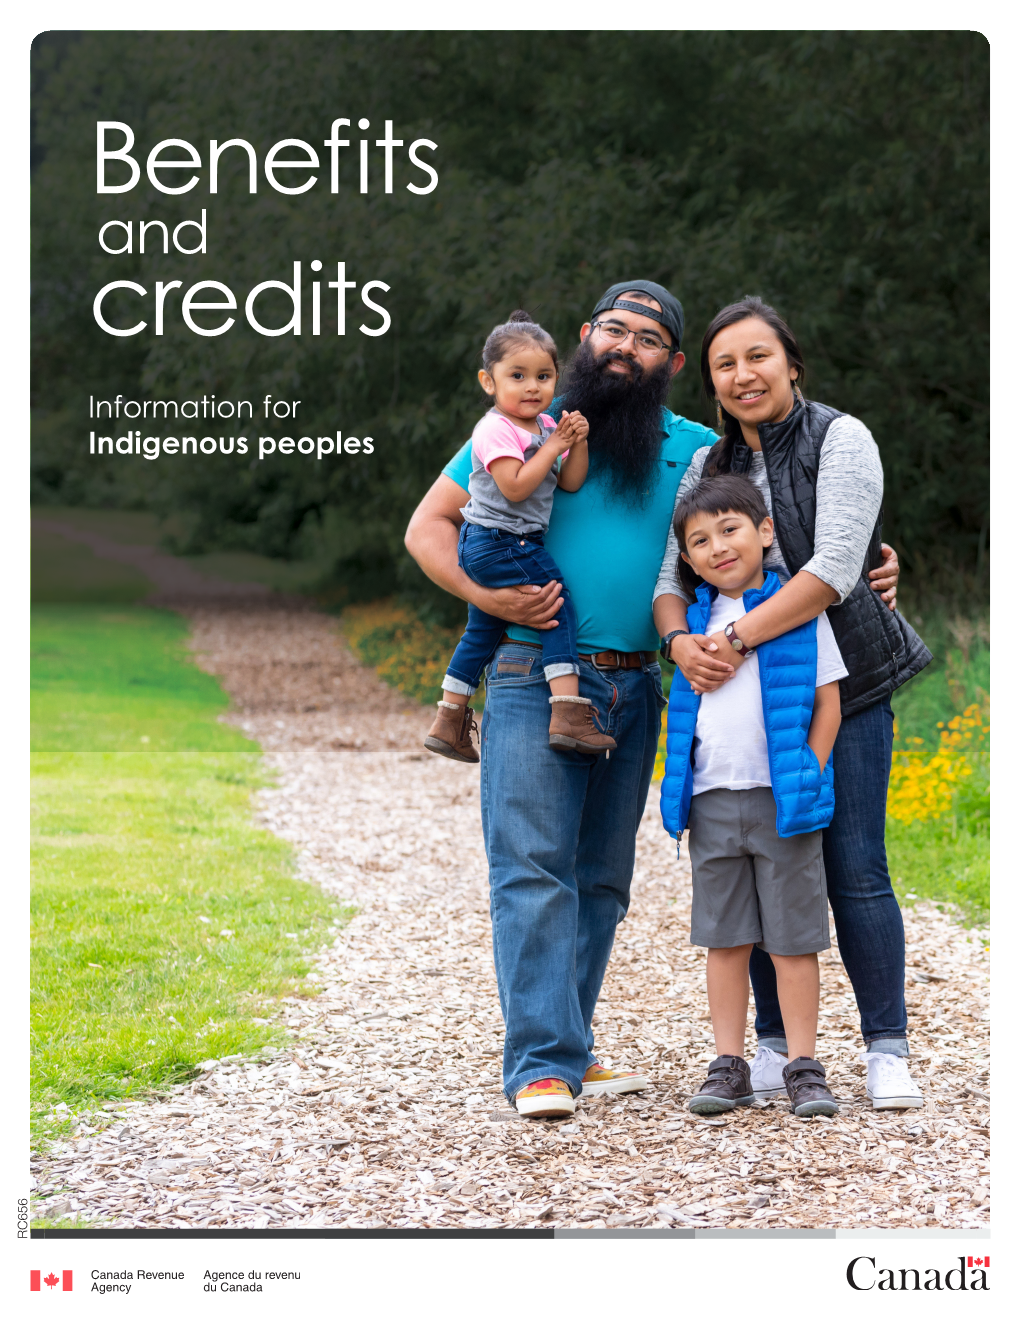 Benefits and Credit Information for Indigenous Peoples